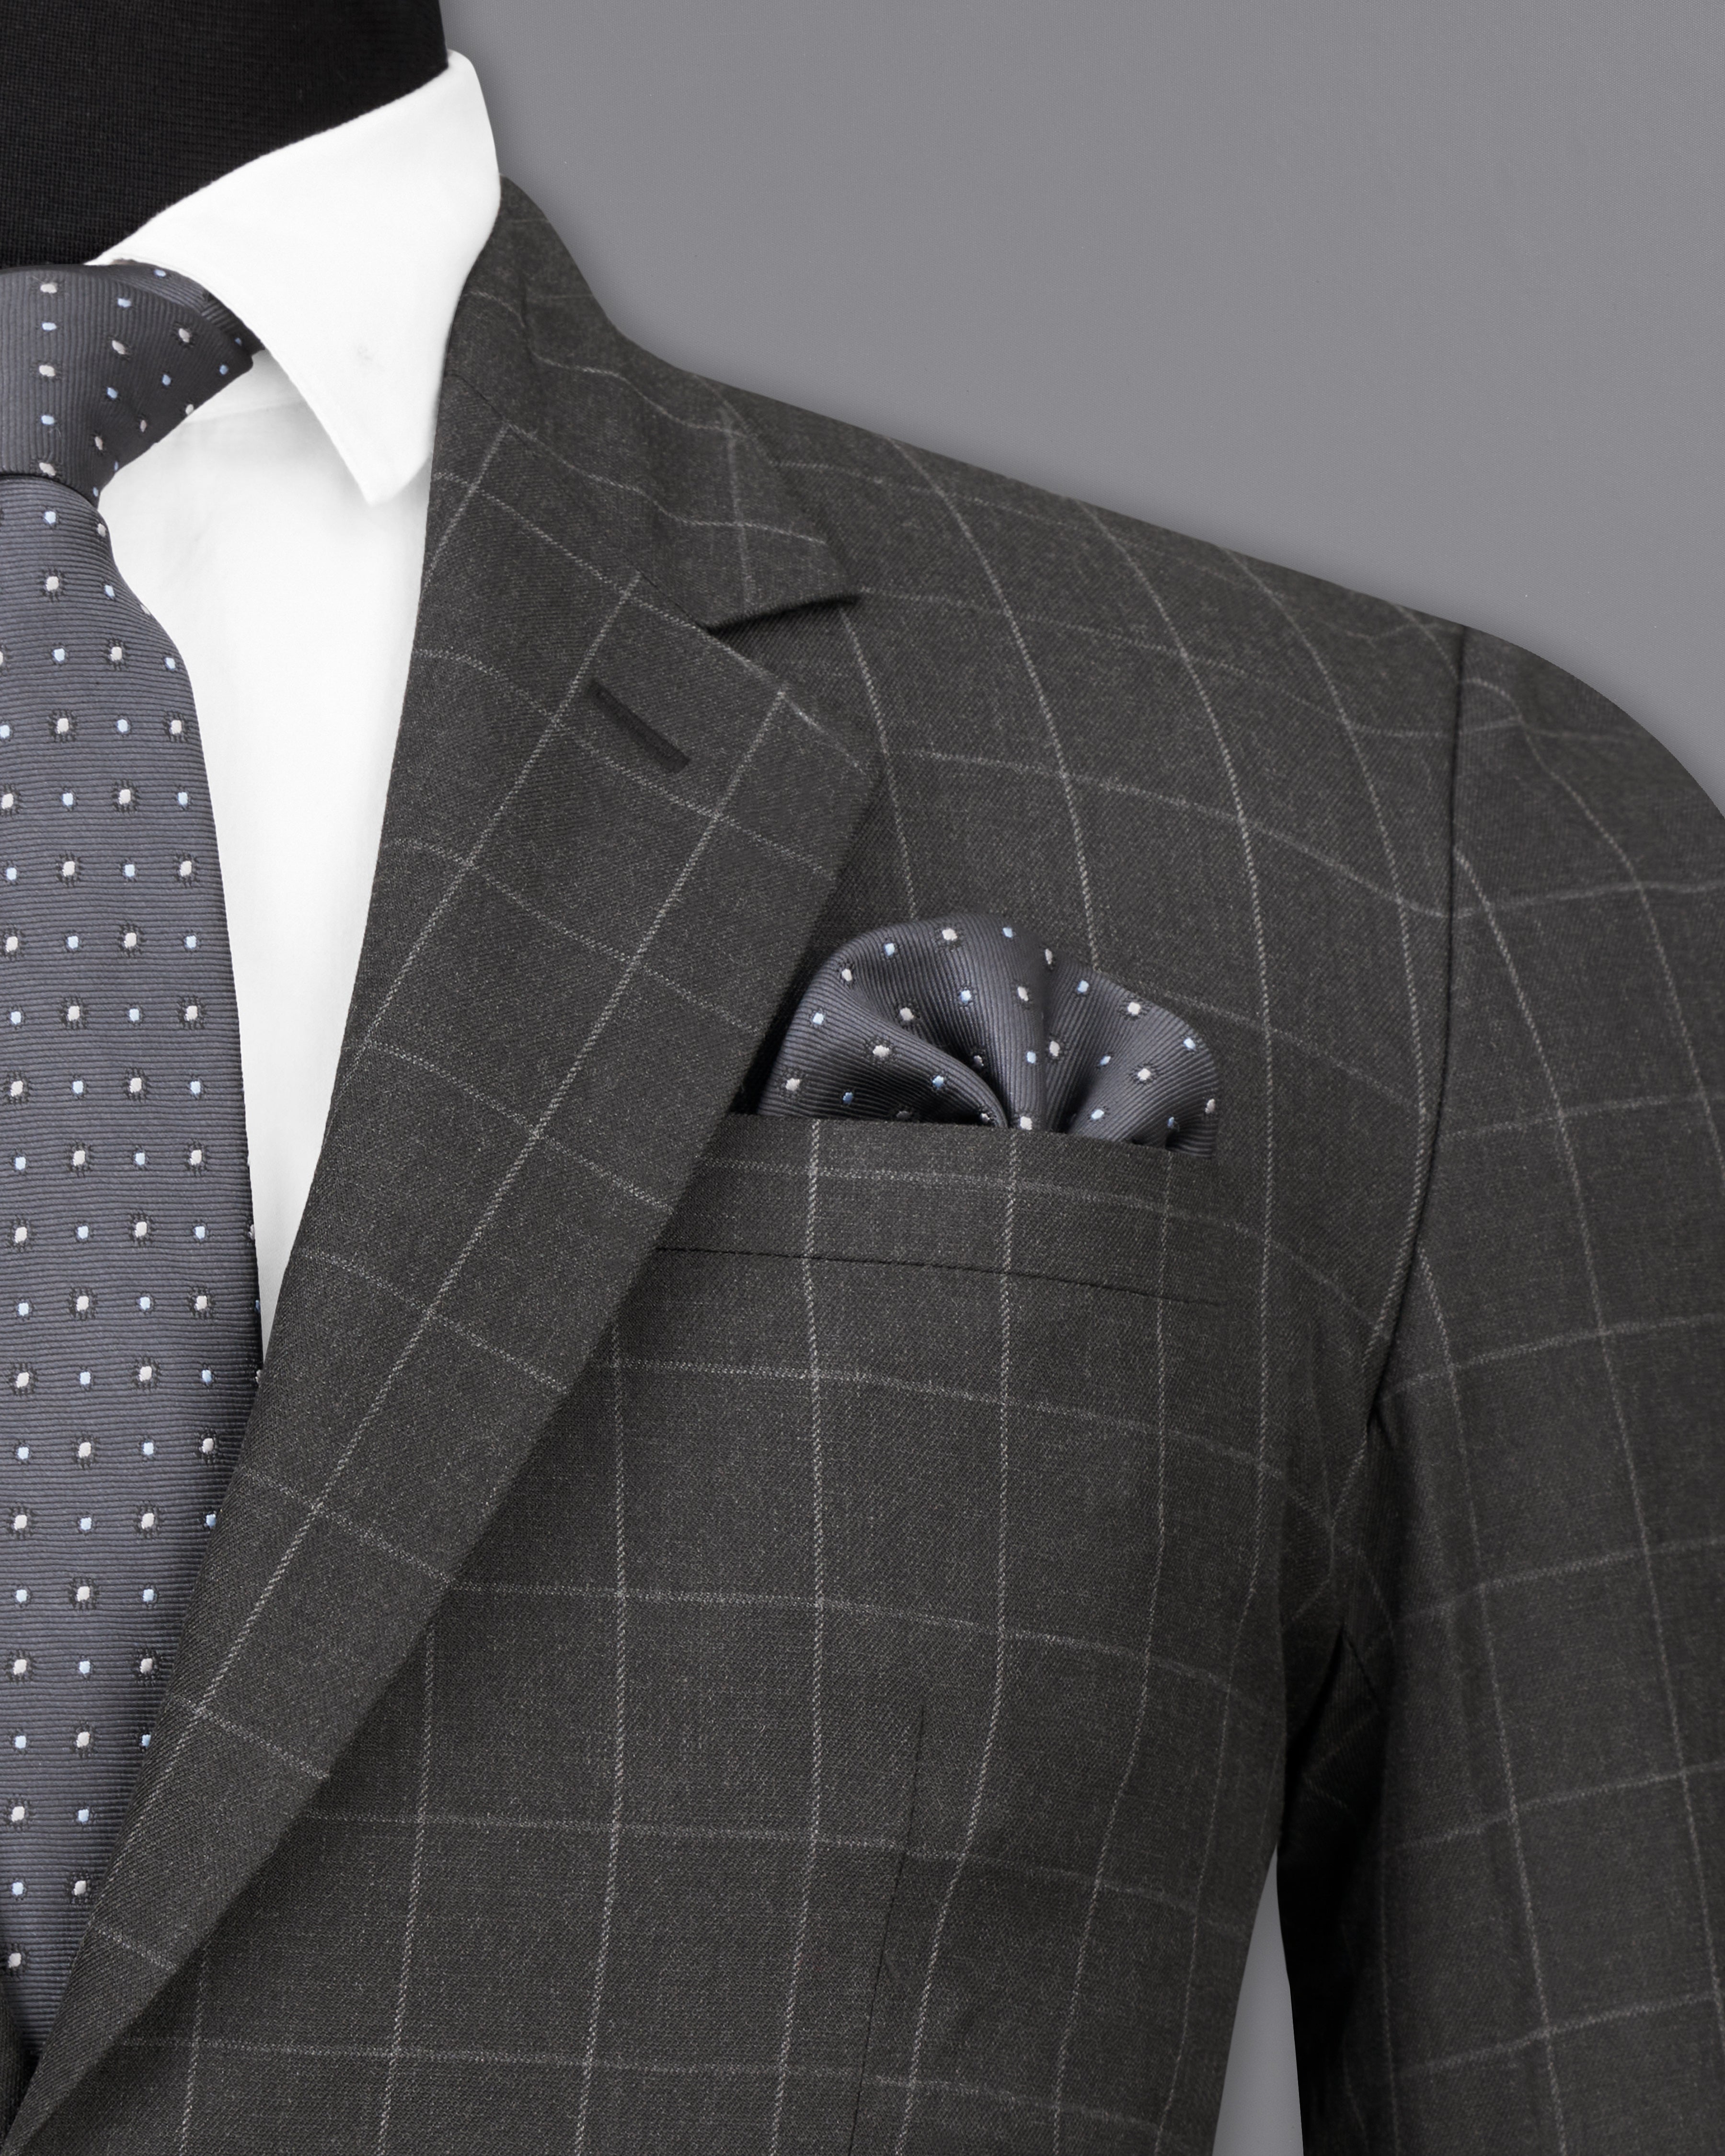 Charcoal Gray Windowpane Single Breasted Suit ST2473-SB-36, ST2473-SB-38, ST2473-SB-40, ST2473-SB-42, ST2473-SB-44, ST2473-SB-46, ST2473-SB-48, ST2473-SB-50, ST2473-SB-52, ST2473-SB-54, ST2473-SB-56, ST2473-SB-58, ST2473-SB-60